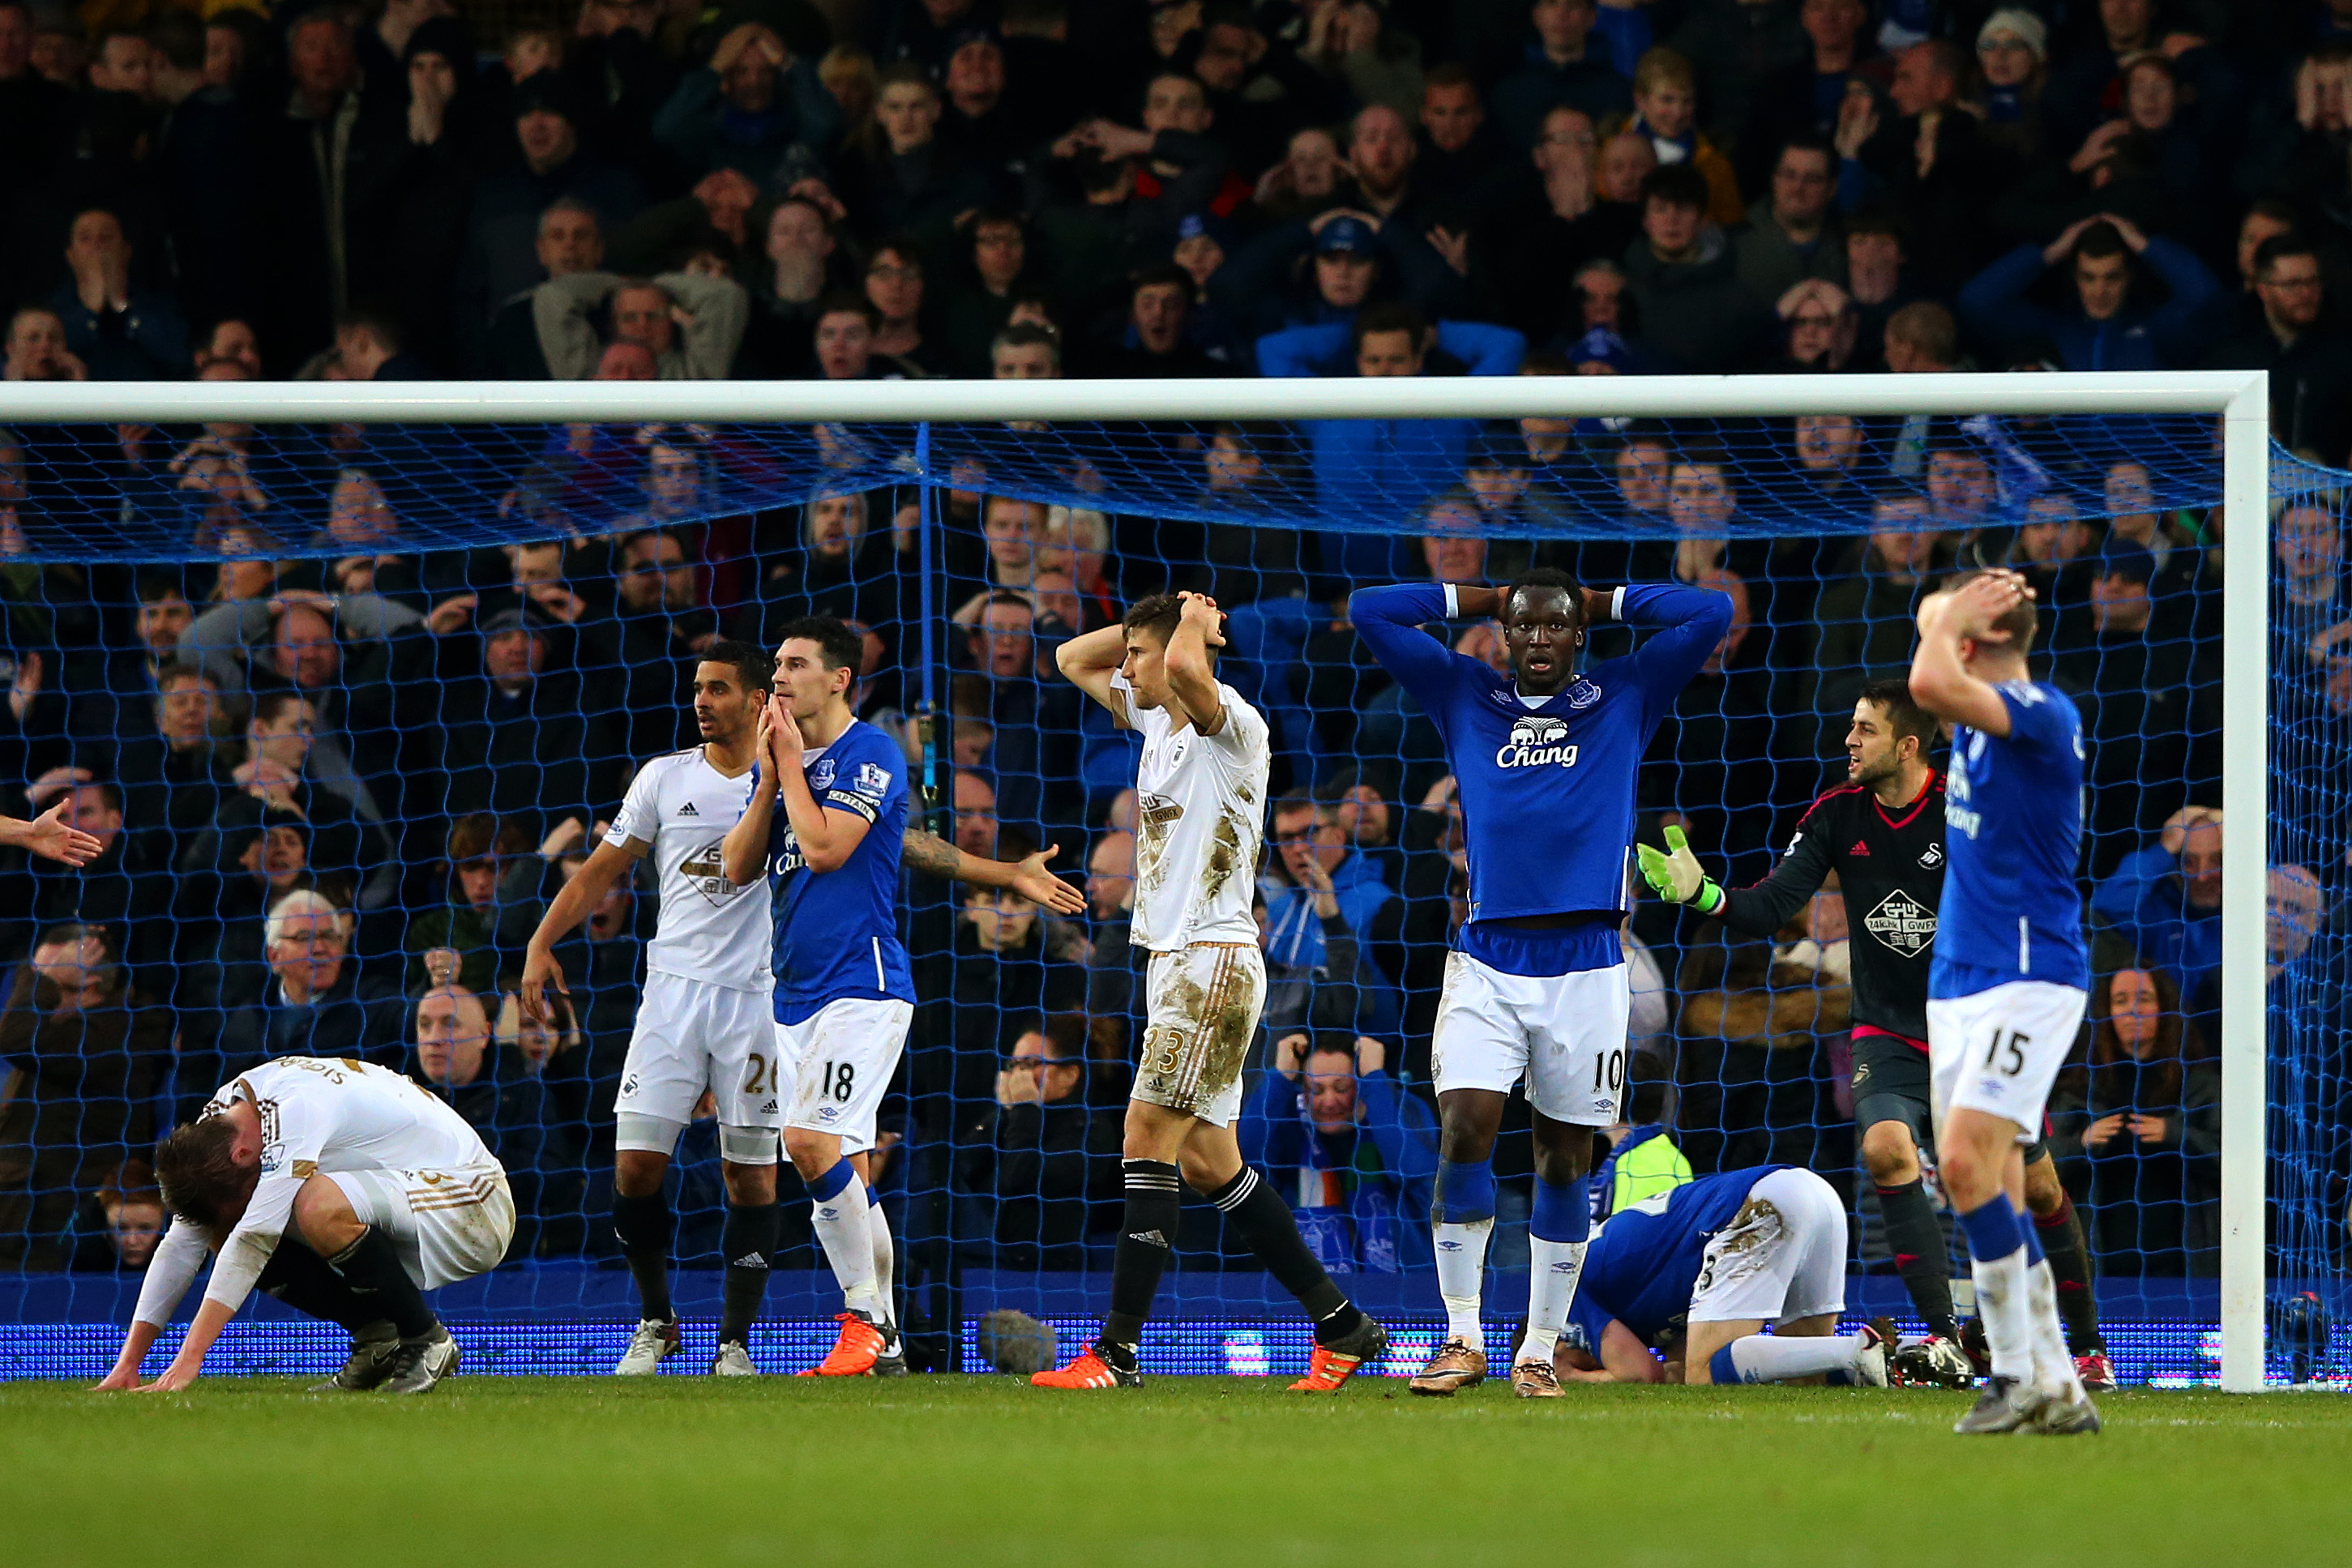 One picture encapsulates Everton's day